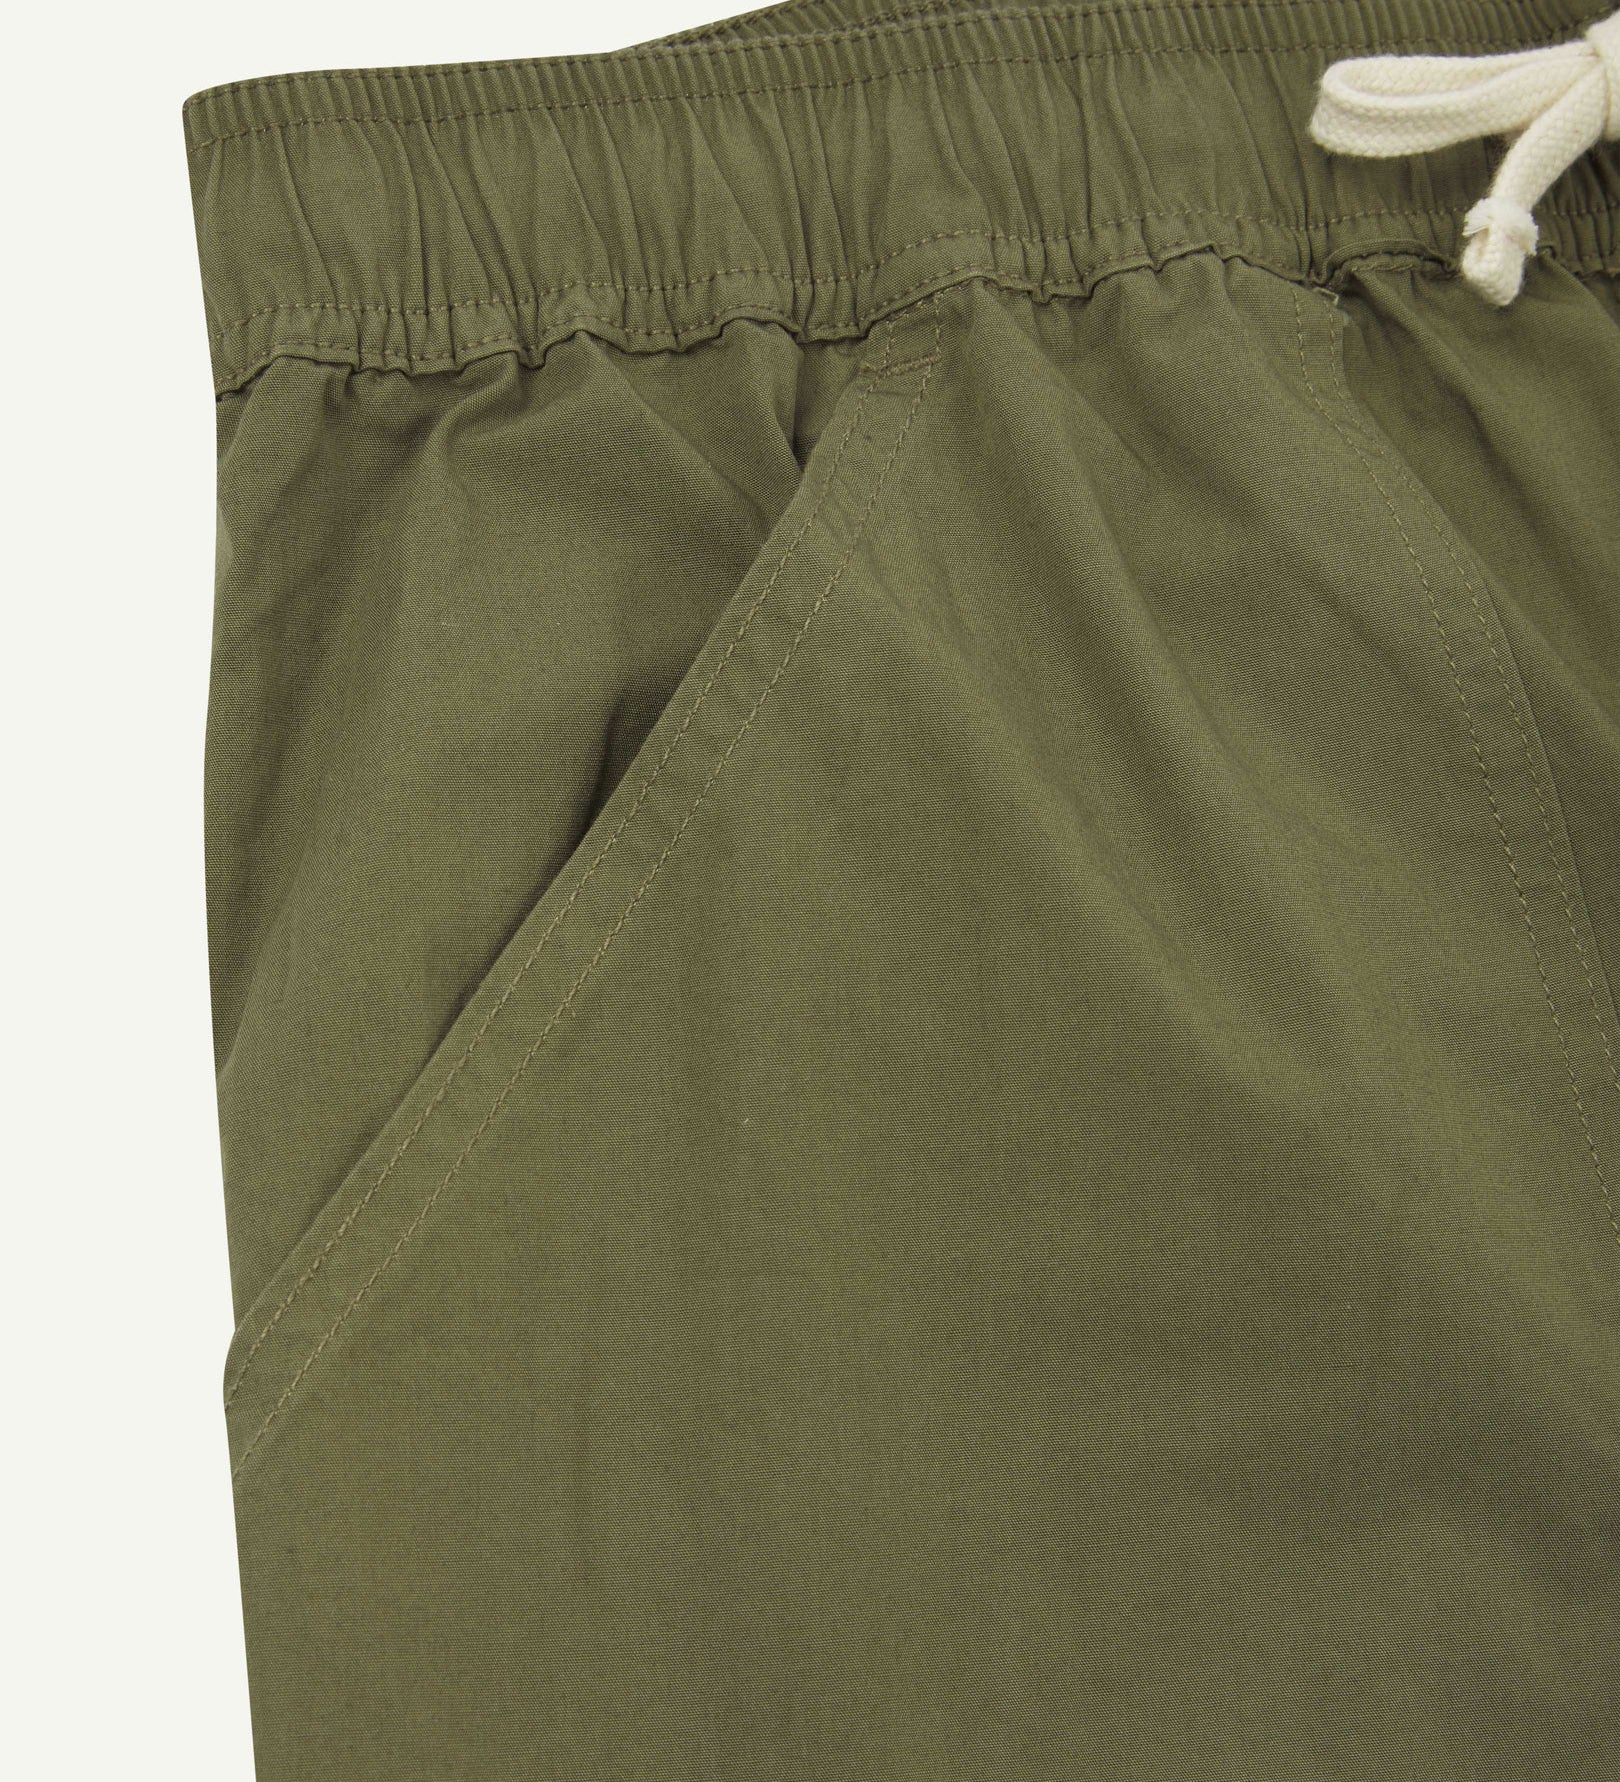 Front close-up shot of Uskees 5020 lightweight utility pants in olive-green showing waist and front pocket detail.